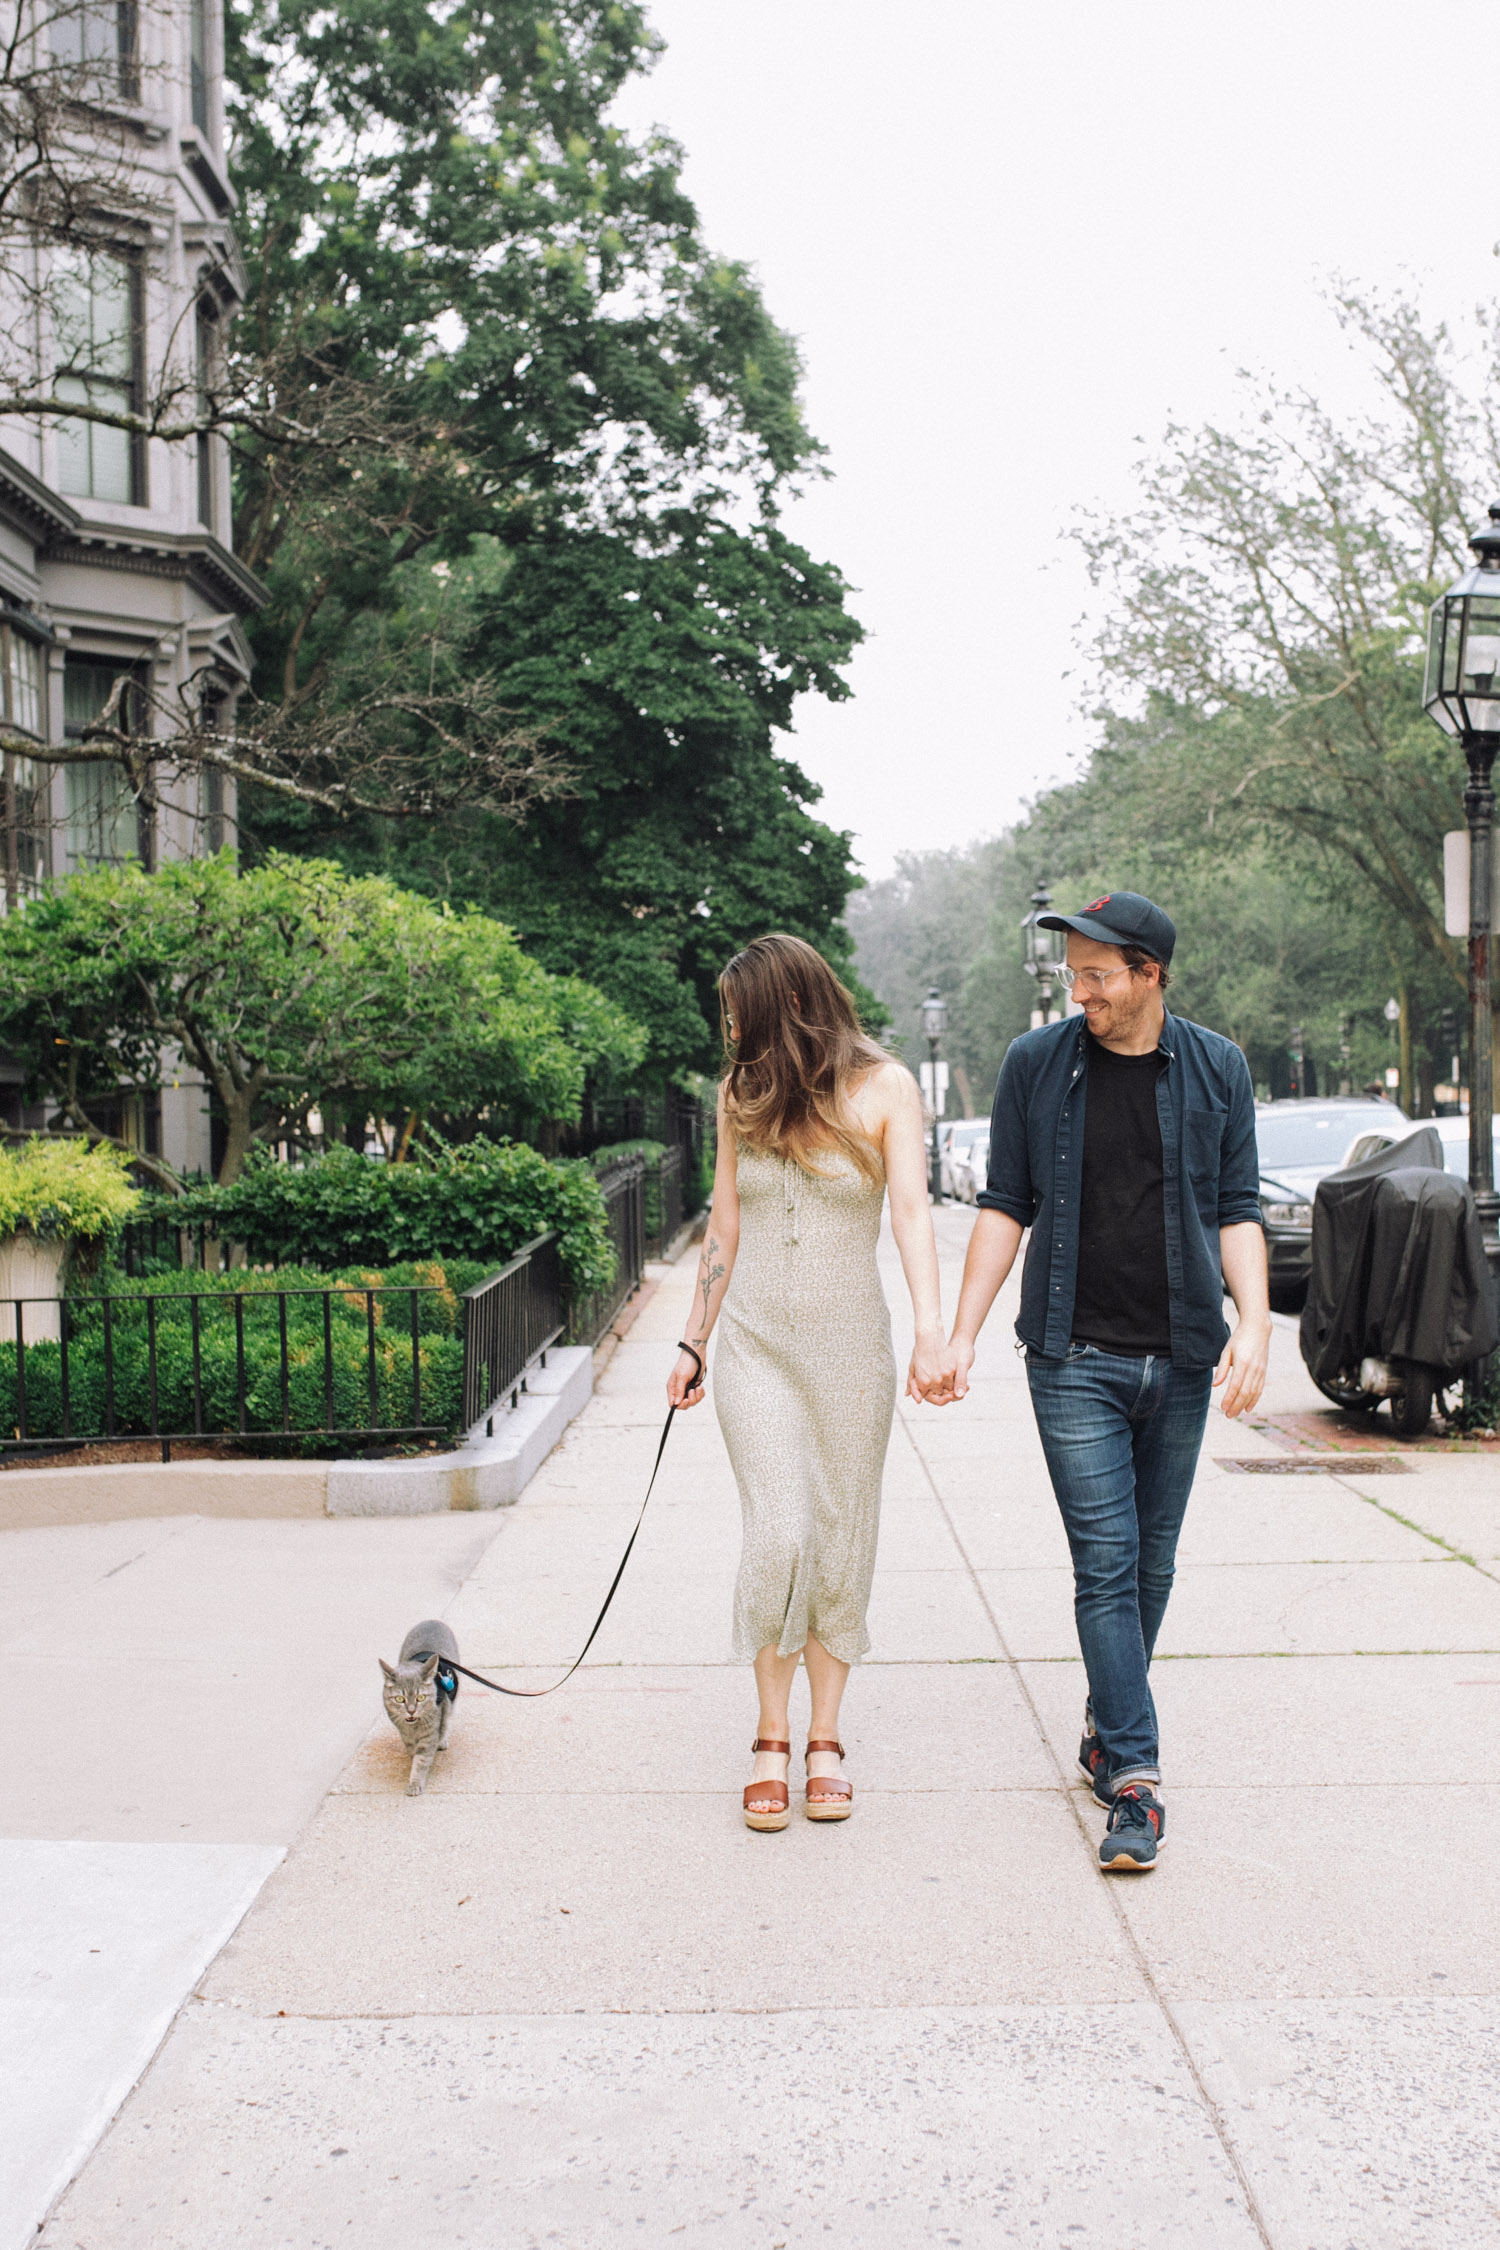 Man and woman hold hands and walk their cat in back bay